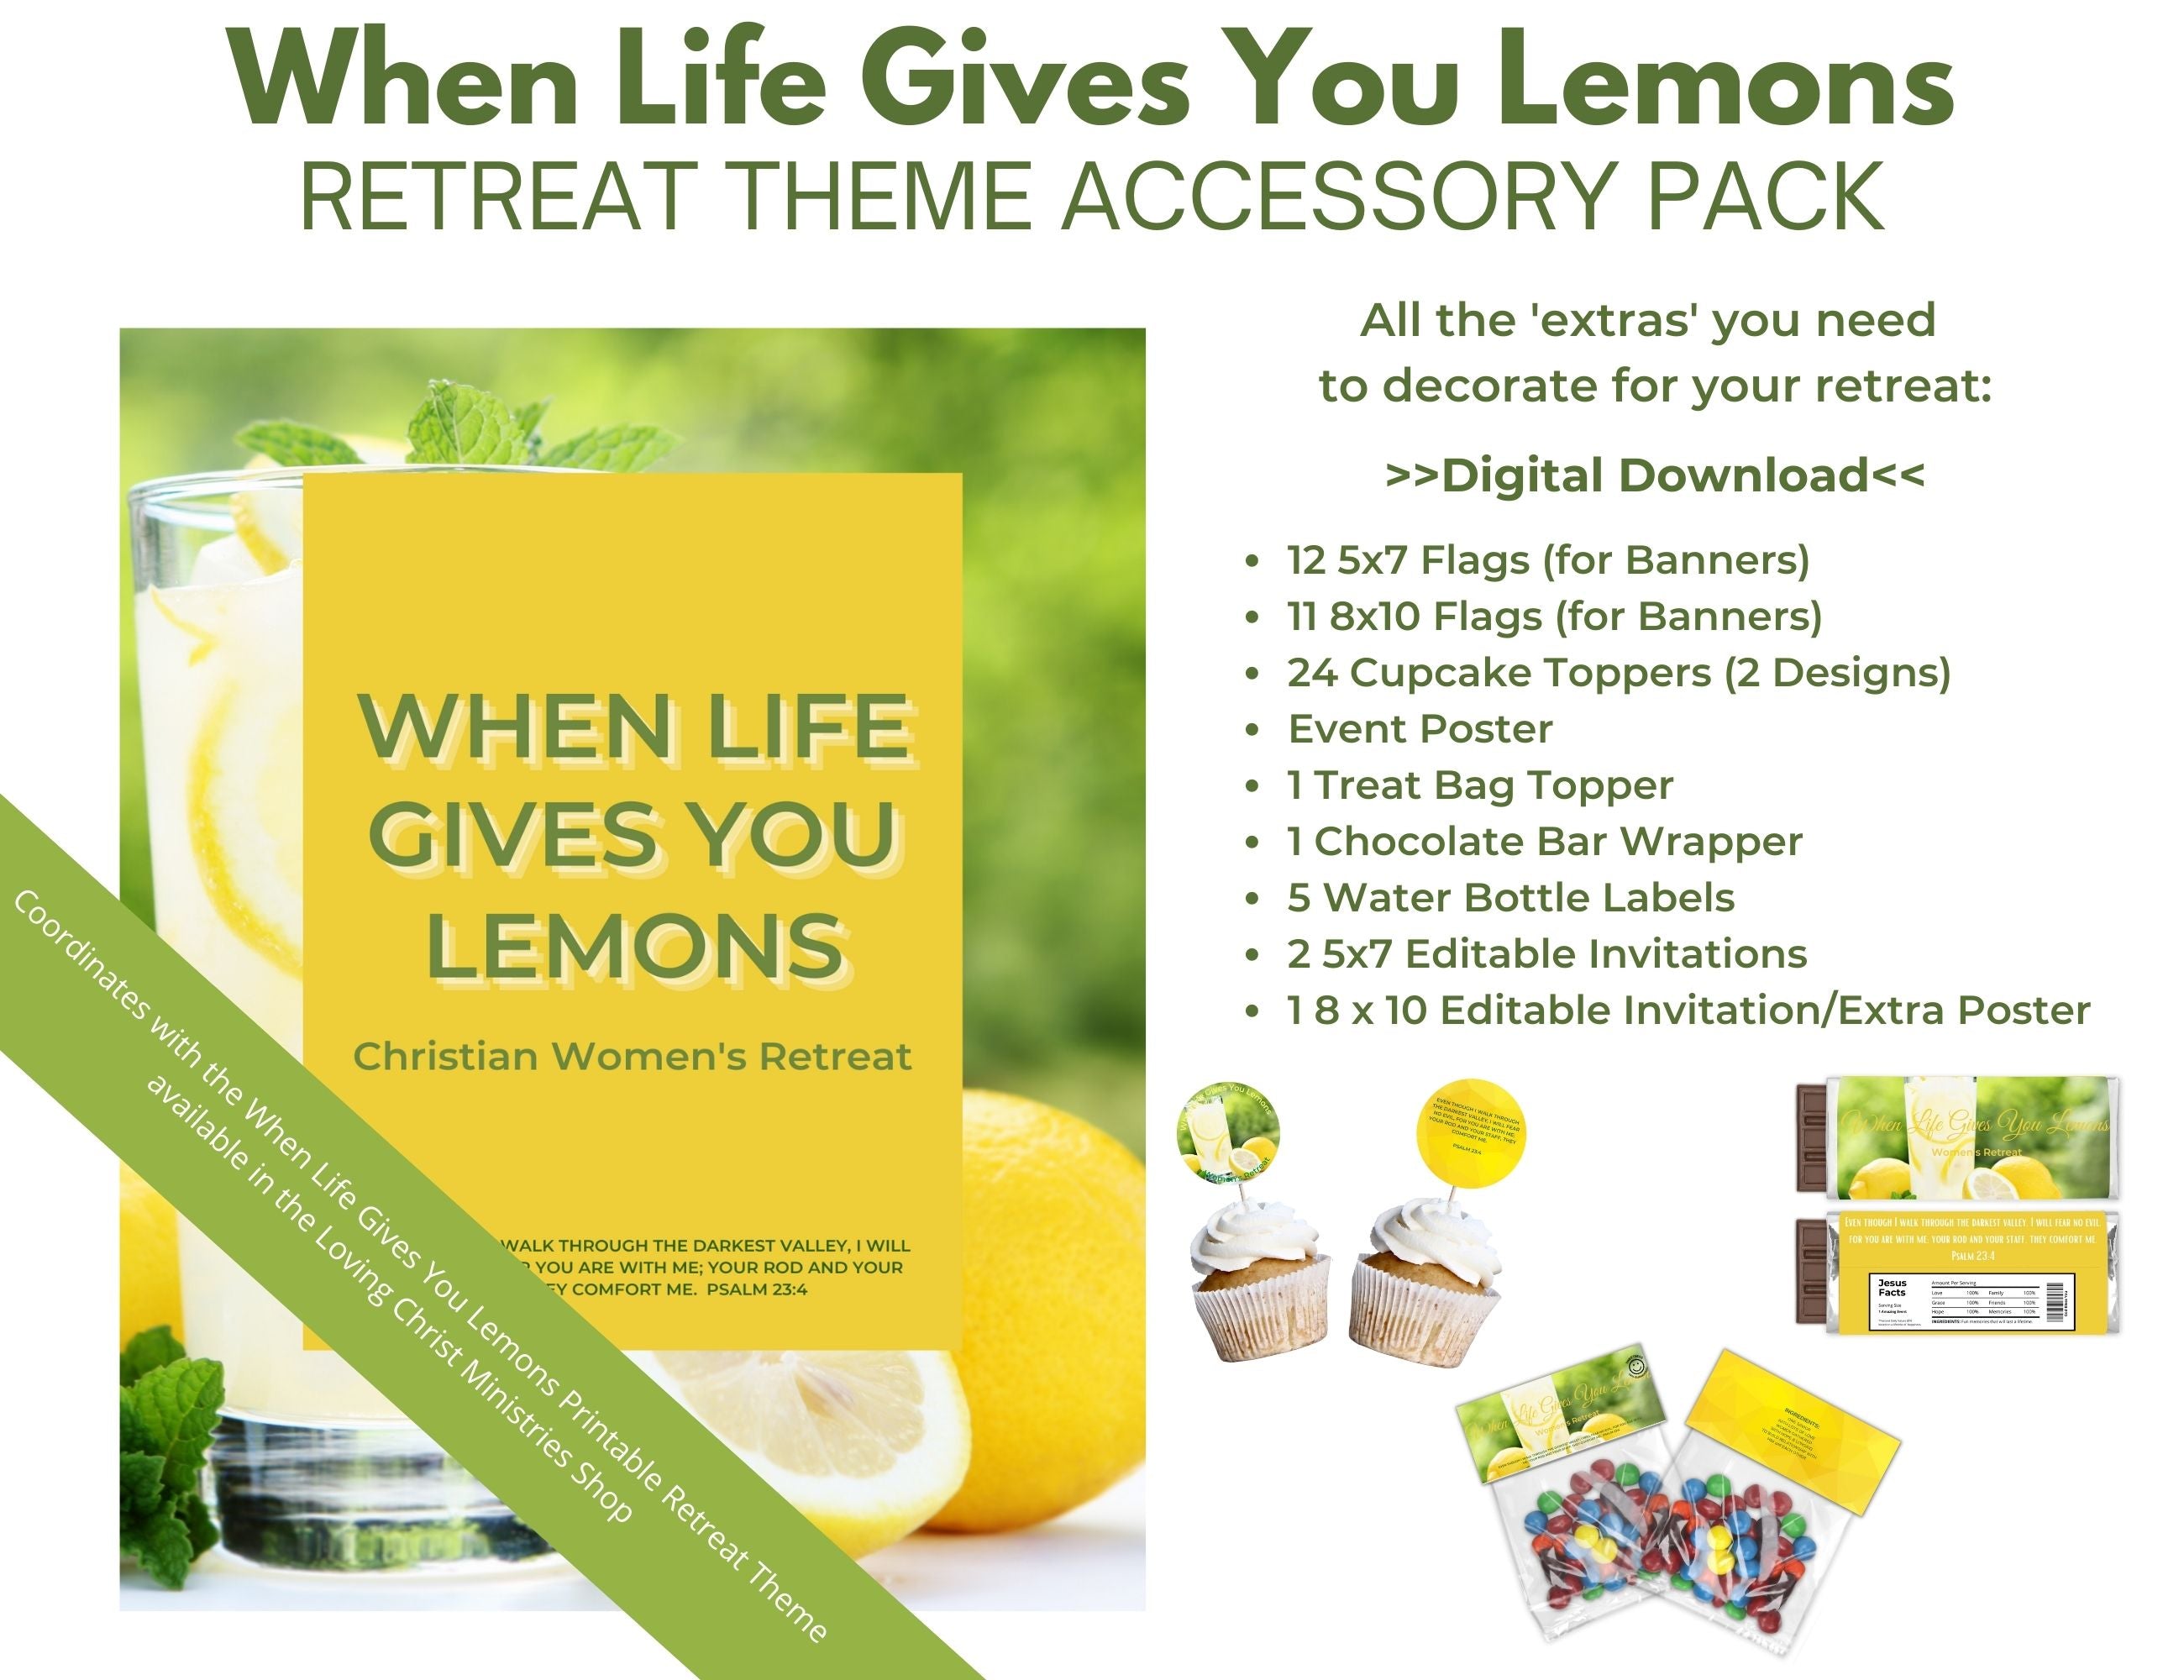 When Life Gives You Lemons Decoration Pack